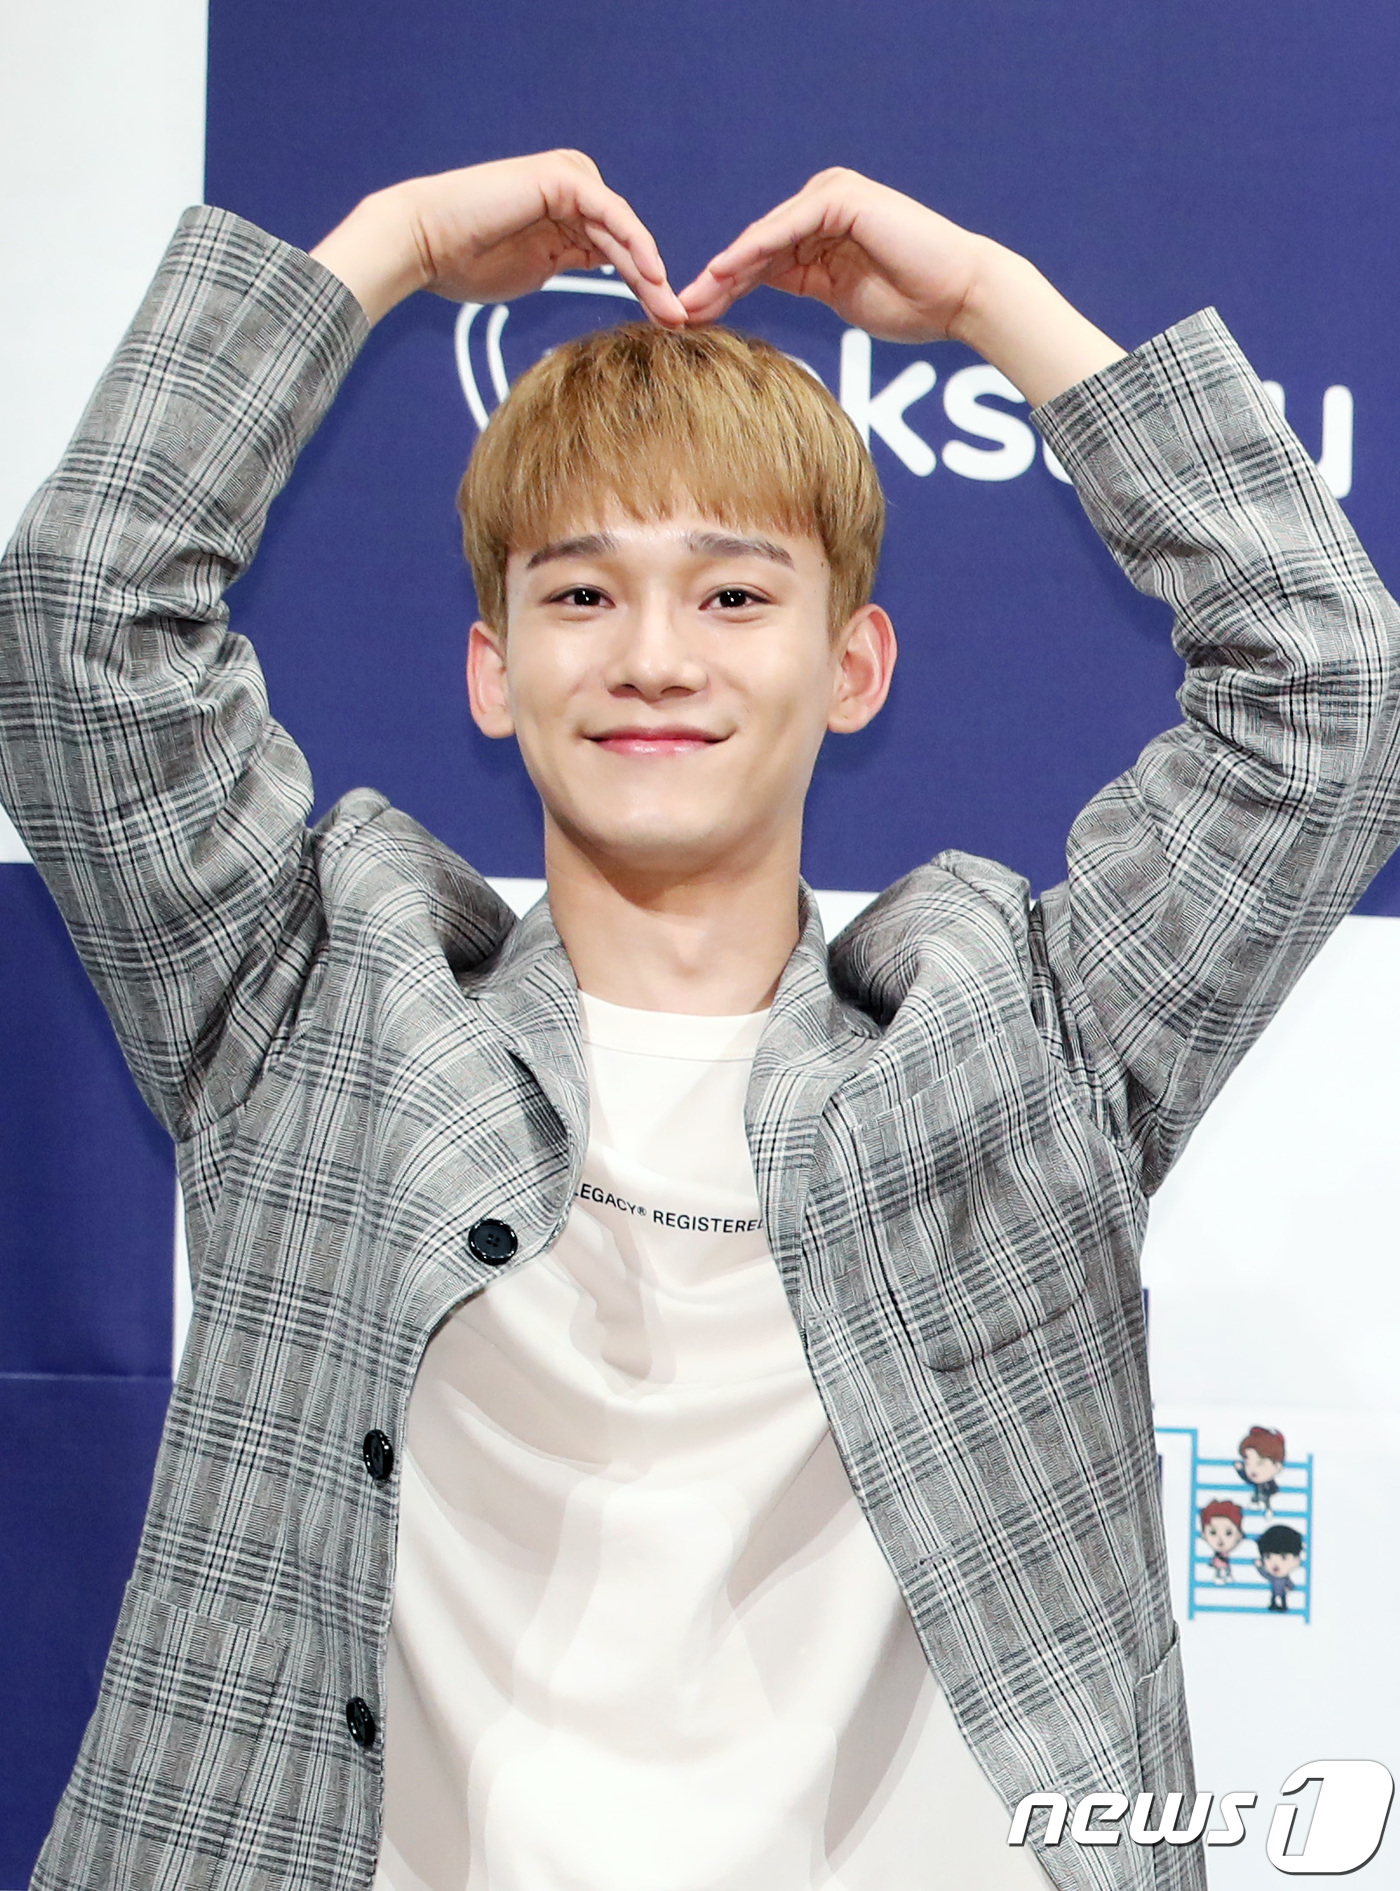 Seoul = = EXO Chen, who stands out as a solo singer, returns with his second album.As a result of the 29th coverage, Chen will release his second solo album in early October and return to the music industry.Chen released his first Mini album April, and Flowers in April, and received a good response by sweeping the top of various music charts and song ranking programs with solo debut and ballad We break up after April (Beautiful goodbye).After that, Chen released a new album that he had prepared in six months, and he was recognized as a solo singer for his first album, and he hopes to return to what song he will return this time.Chen is currently in the midst of finishing the new news.